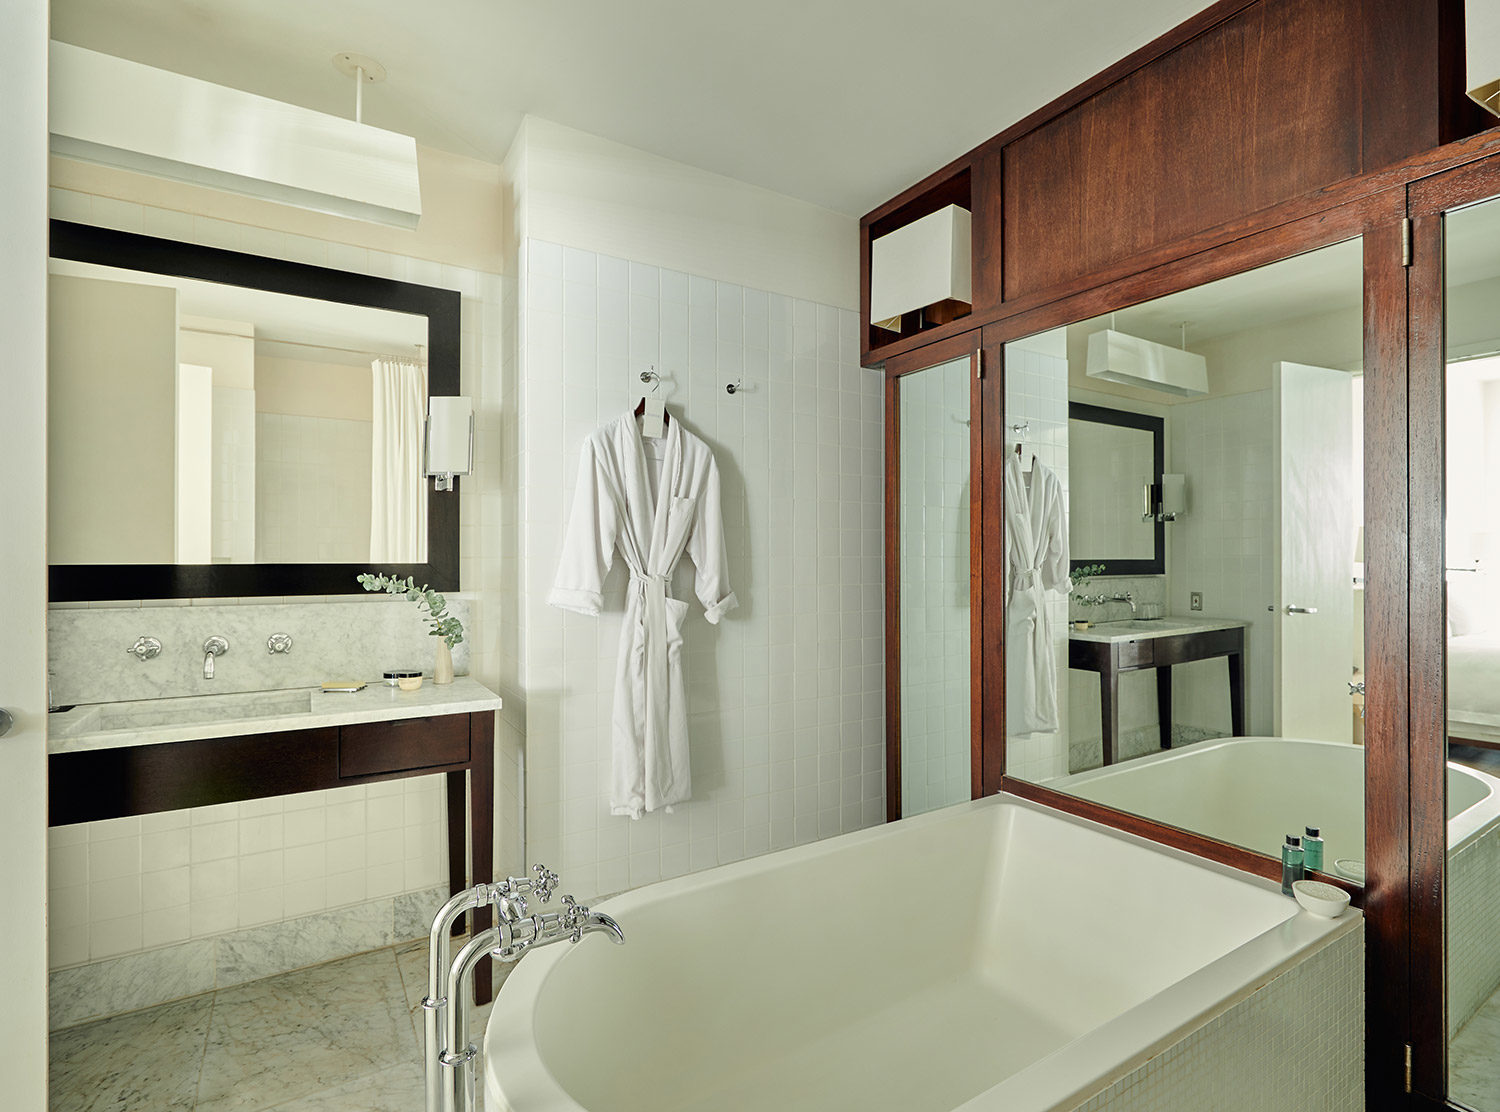 Mercer Hotel The all-white bathroom instantly puts you in a state of zen